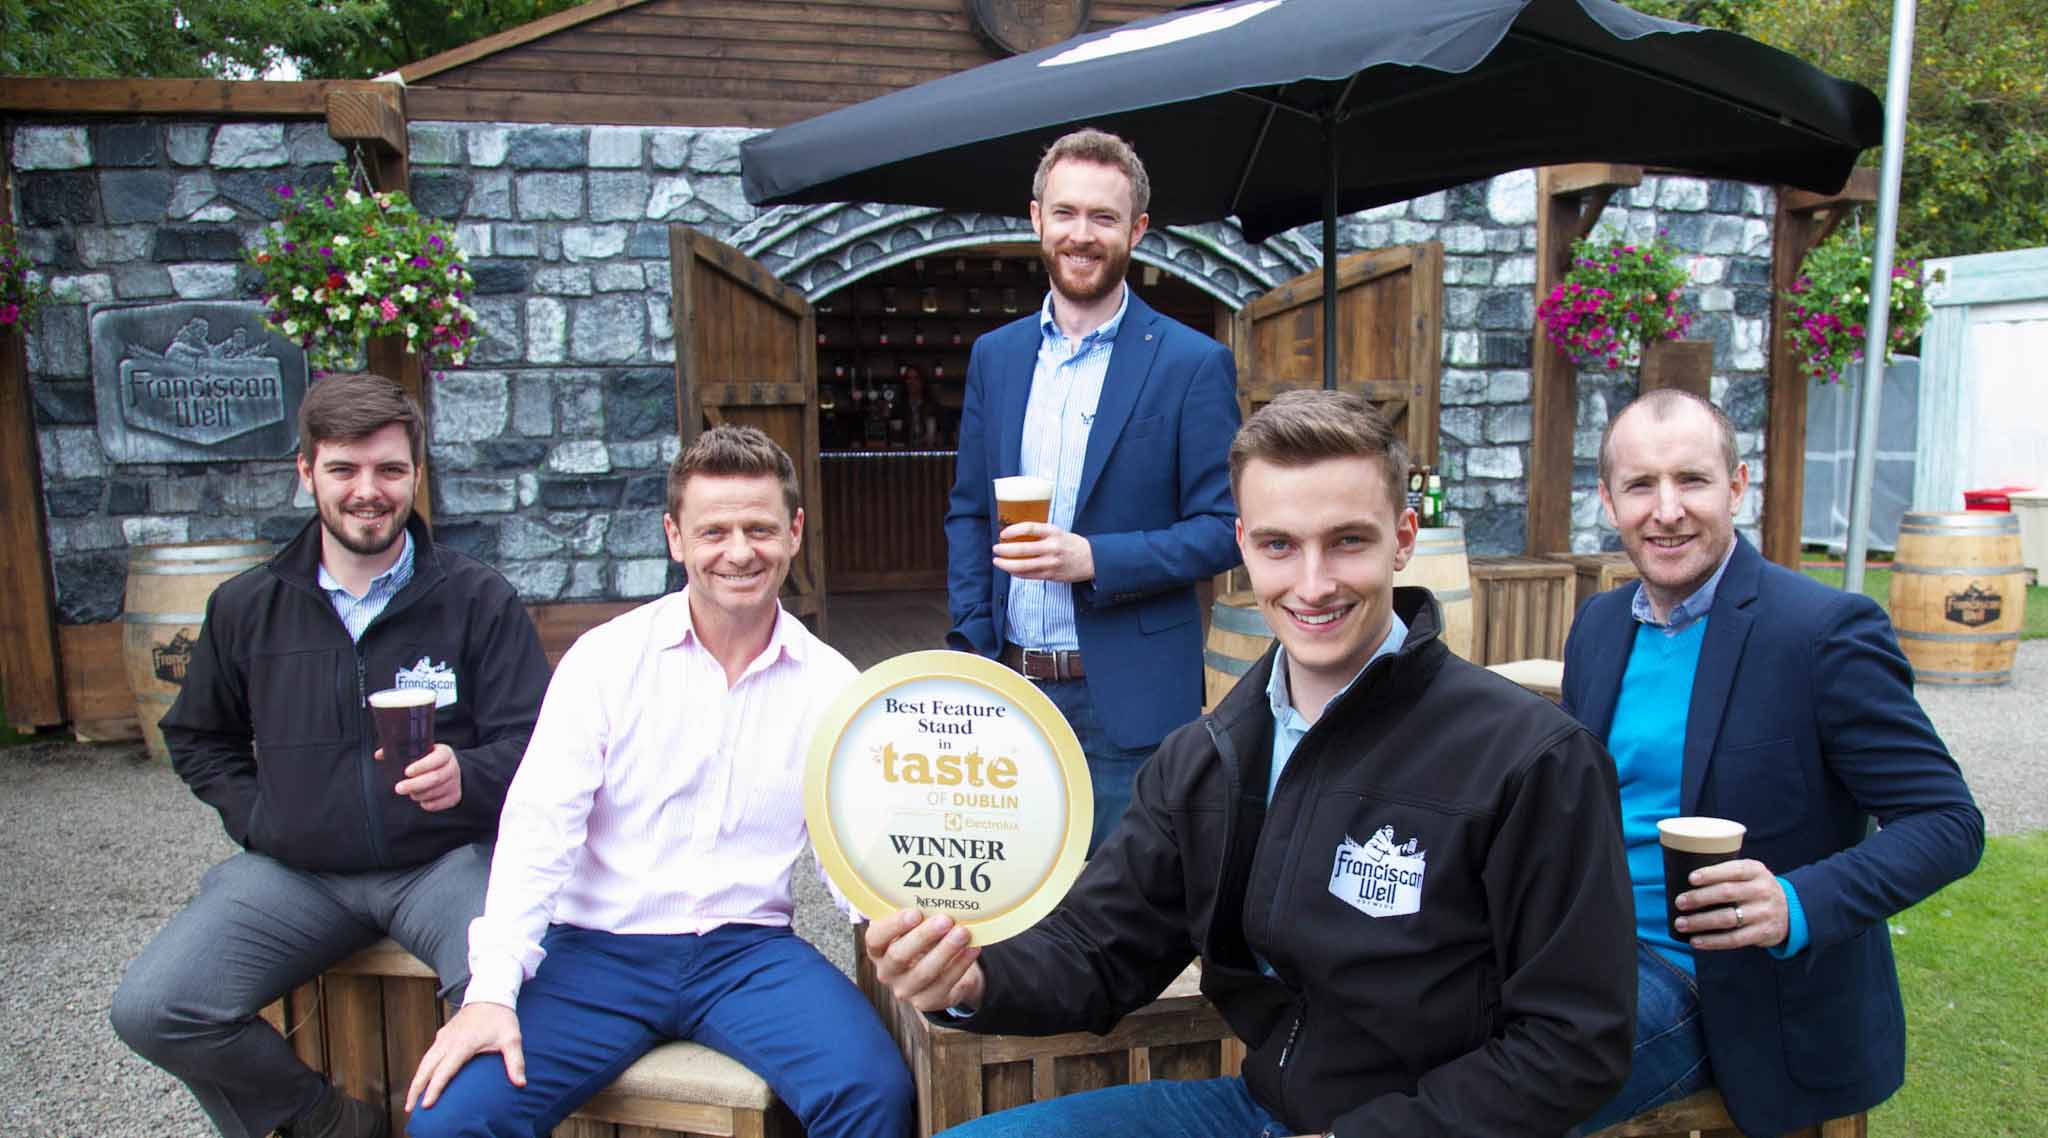 Featuring ‘The Best’ - outside the Franciscan Well stand were the Molson Coors team (from left): Padraig Scully of the Specialist Team, Beer Specialist Des McCann, Craft Brand Manager Seamus Harahan, Customer Activation Manager Neil Hubbard and – Customer Marketing Manager Ronan O’Hagan with their ‘Best Feature Stand’ award.